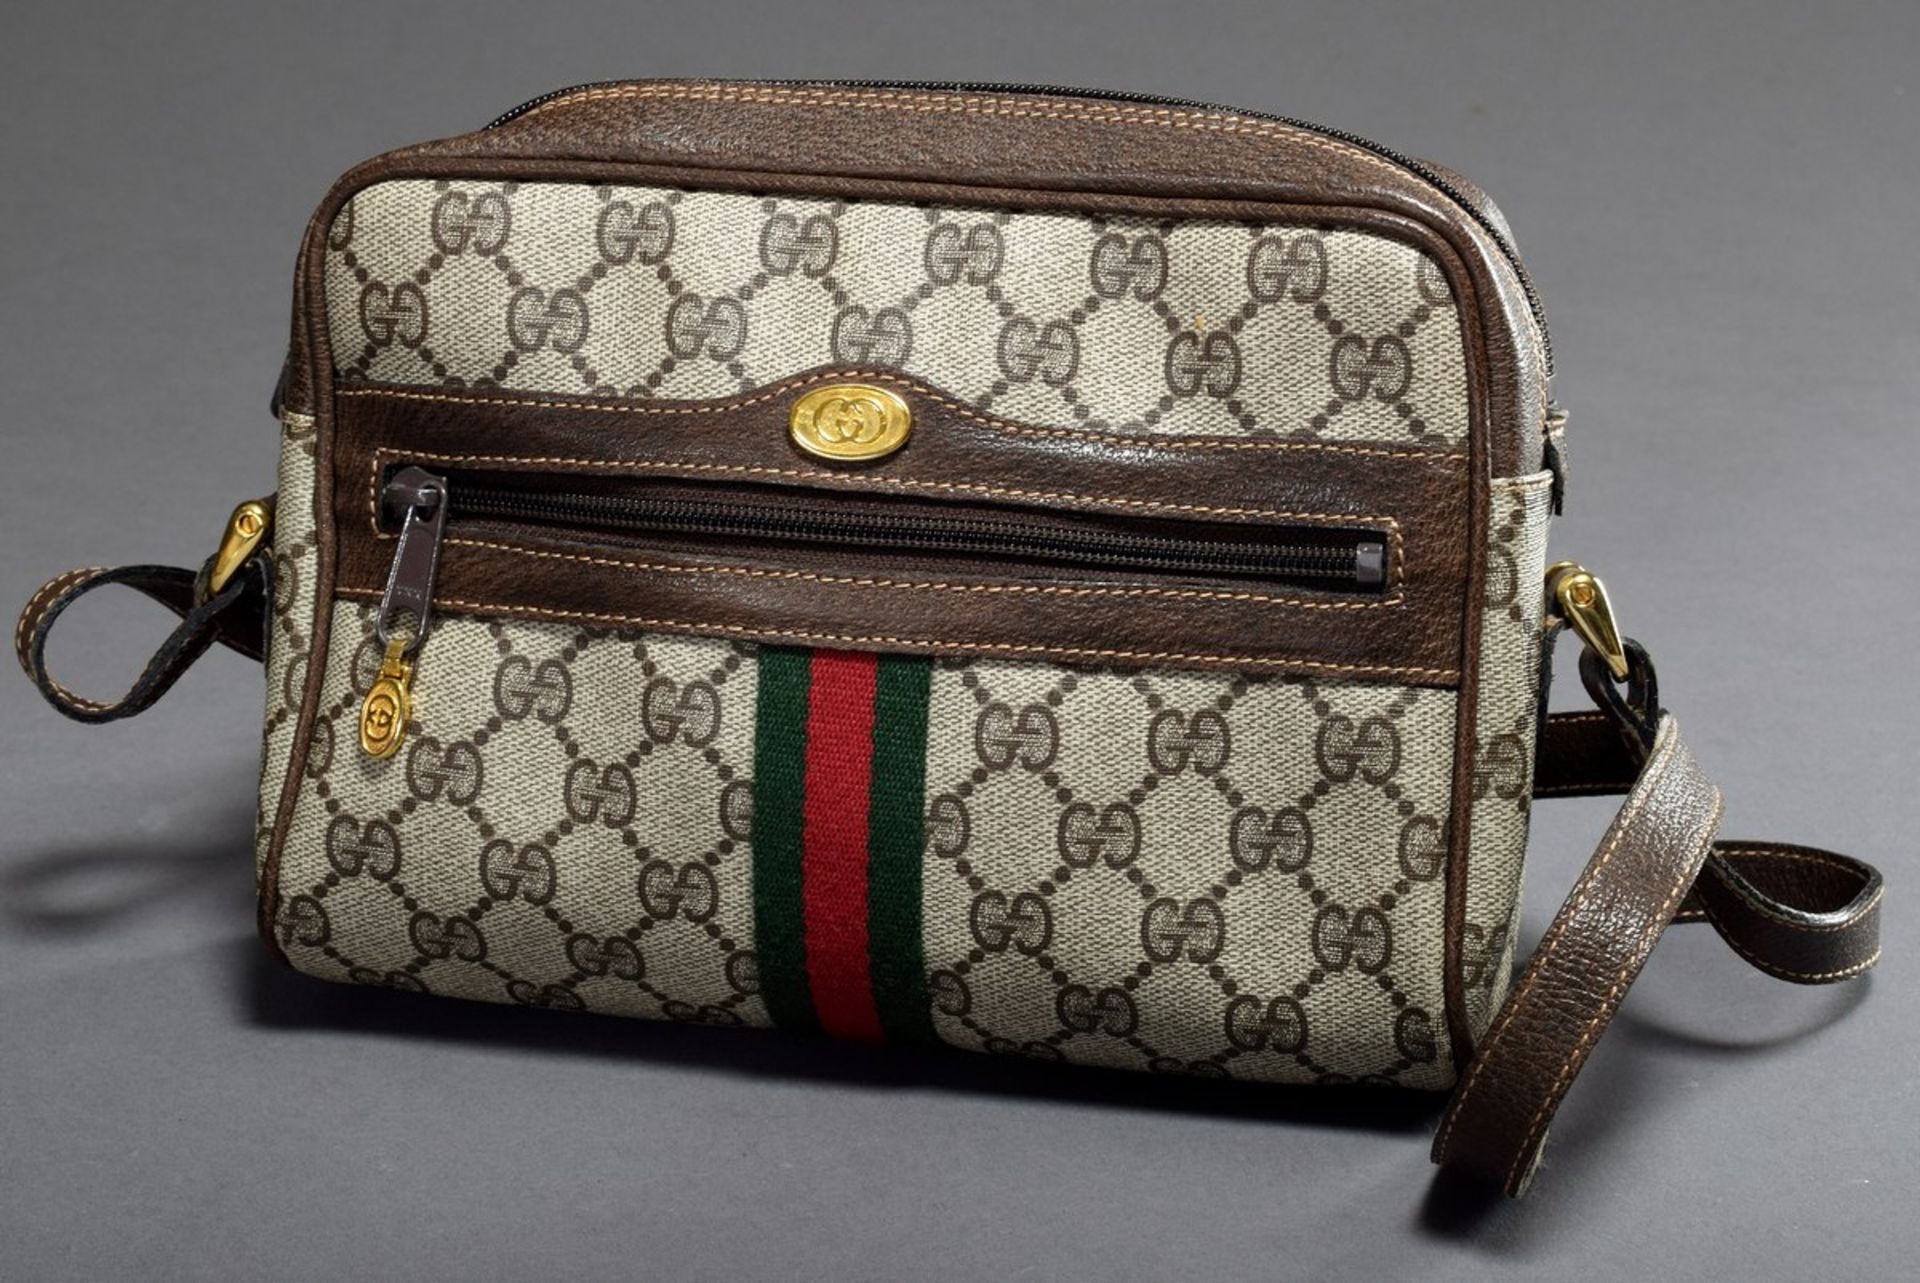 3 Various pieces Gucci "Ophedia" shoulder bag, cosmetic bag and wallet, canvas beige with brown lea - Image 2 of 8